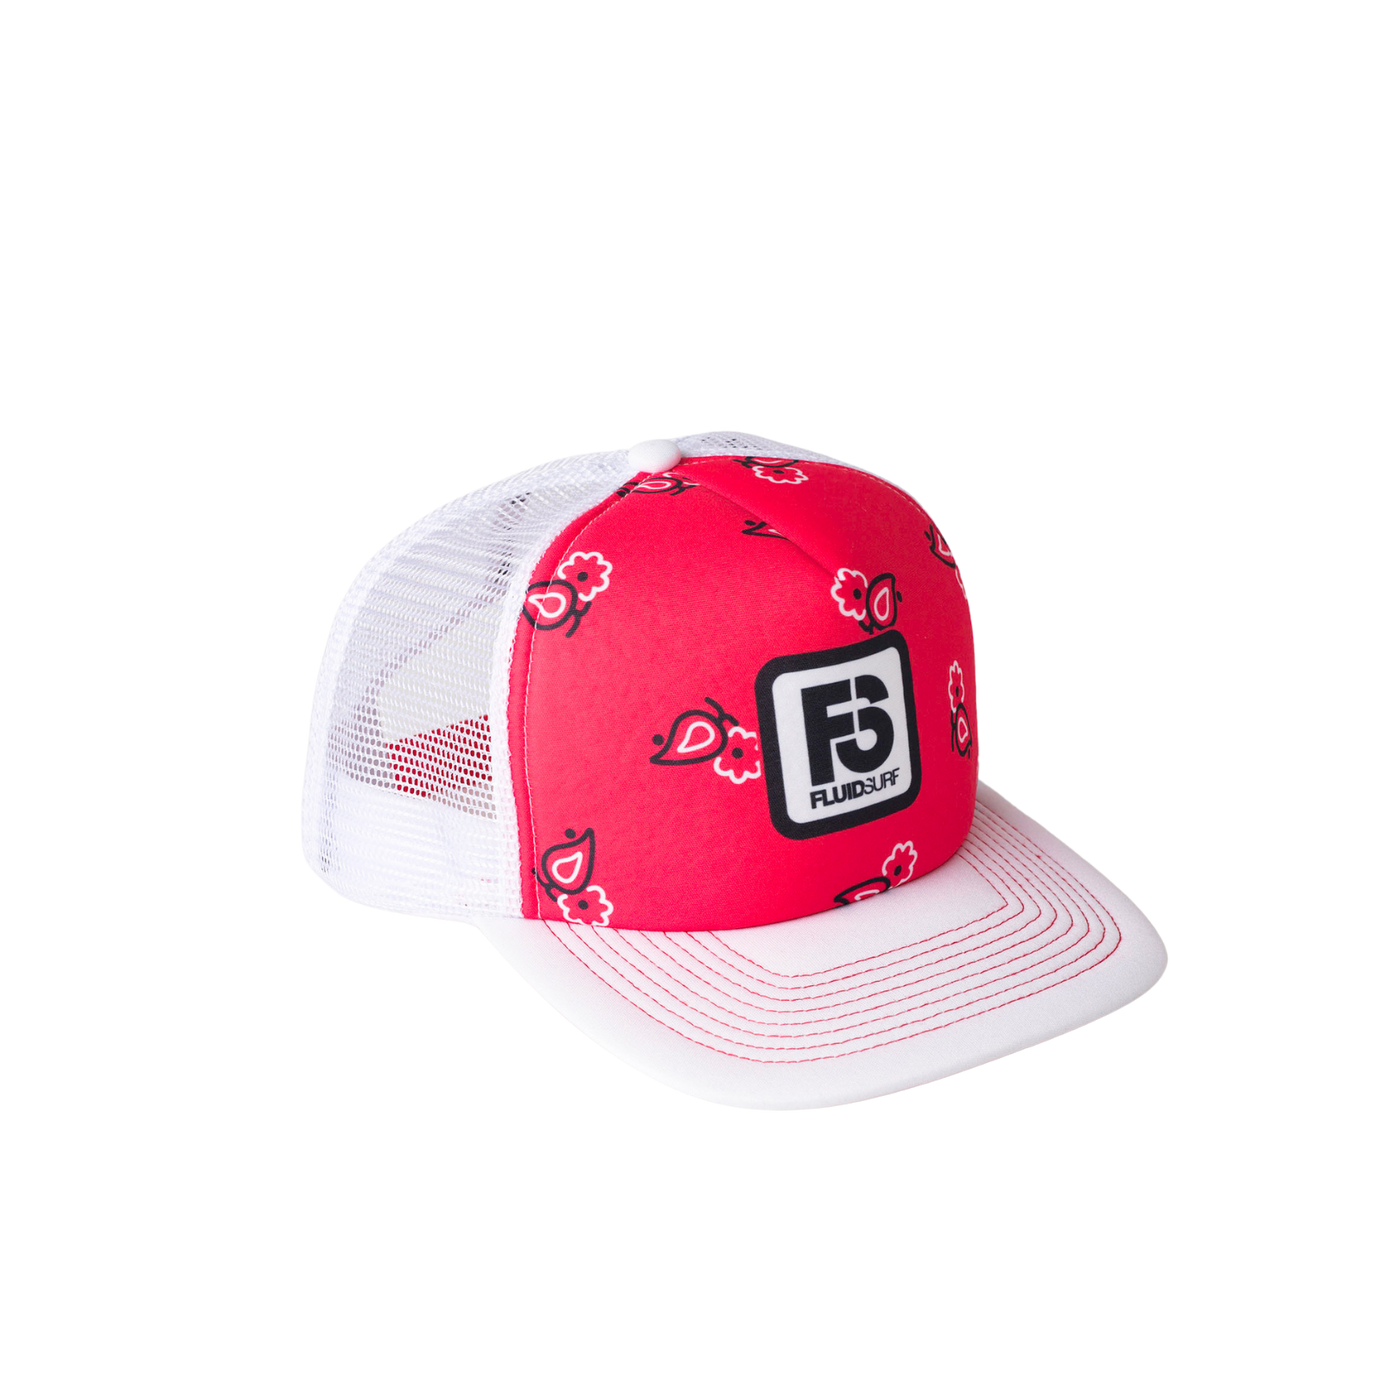 Paisely Red/White Flat Brim Trucker Cap